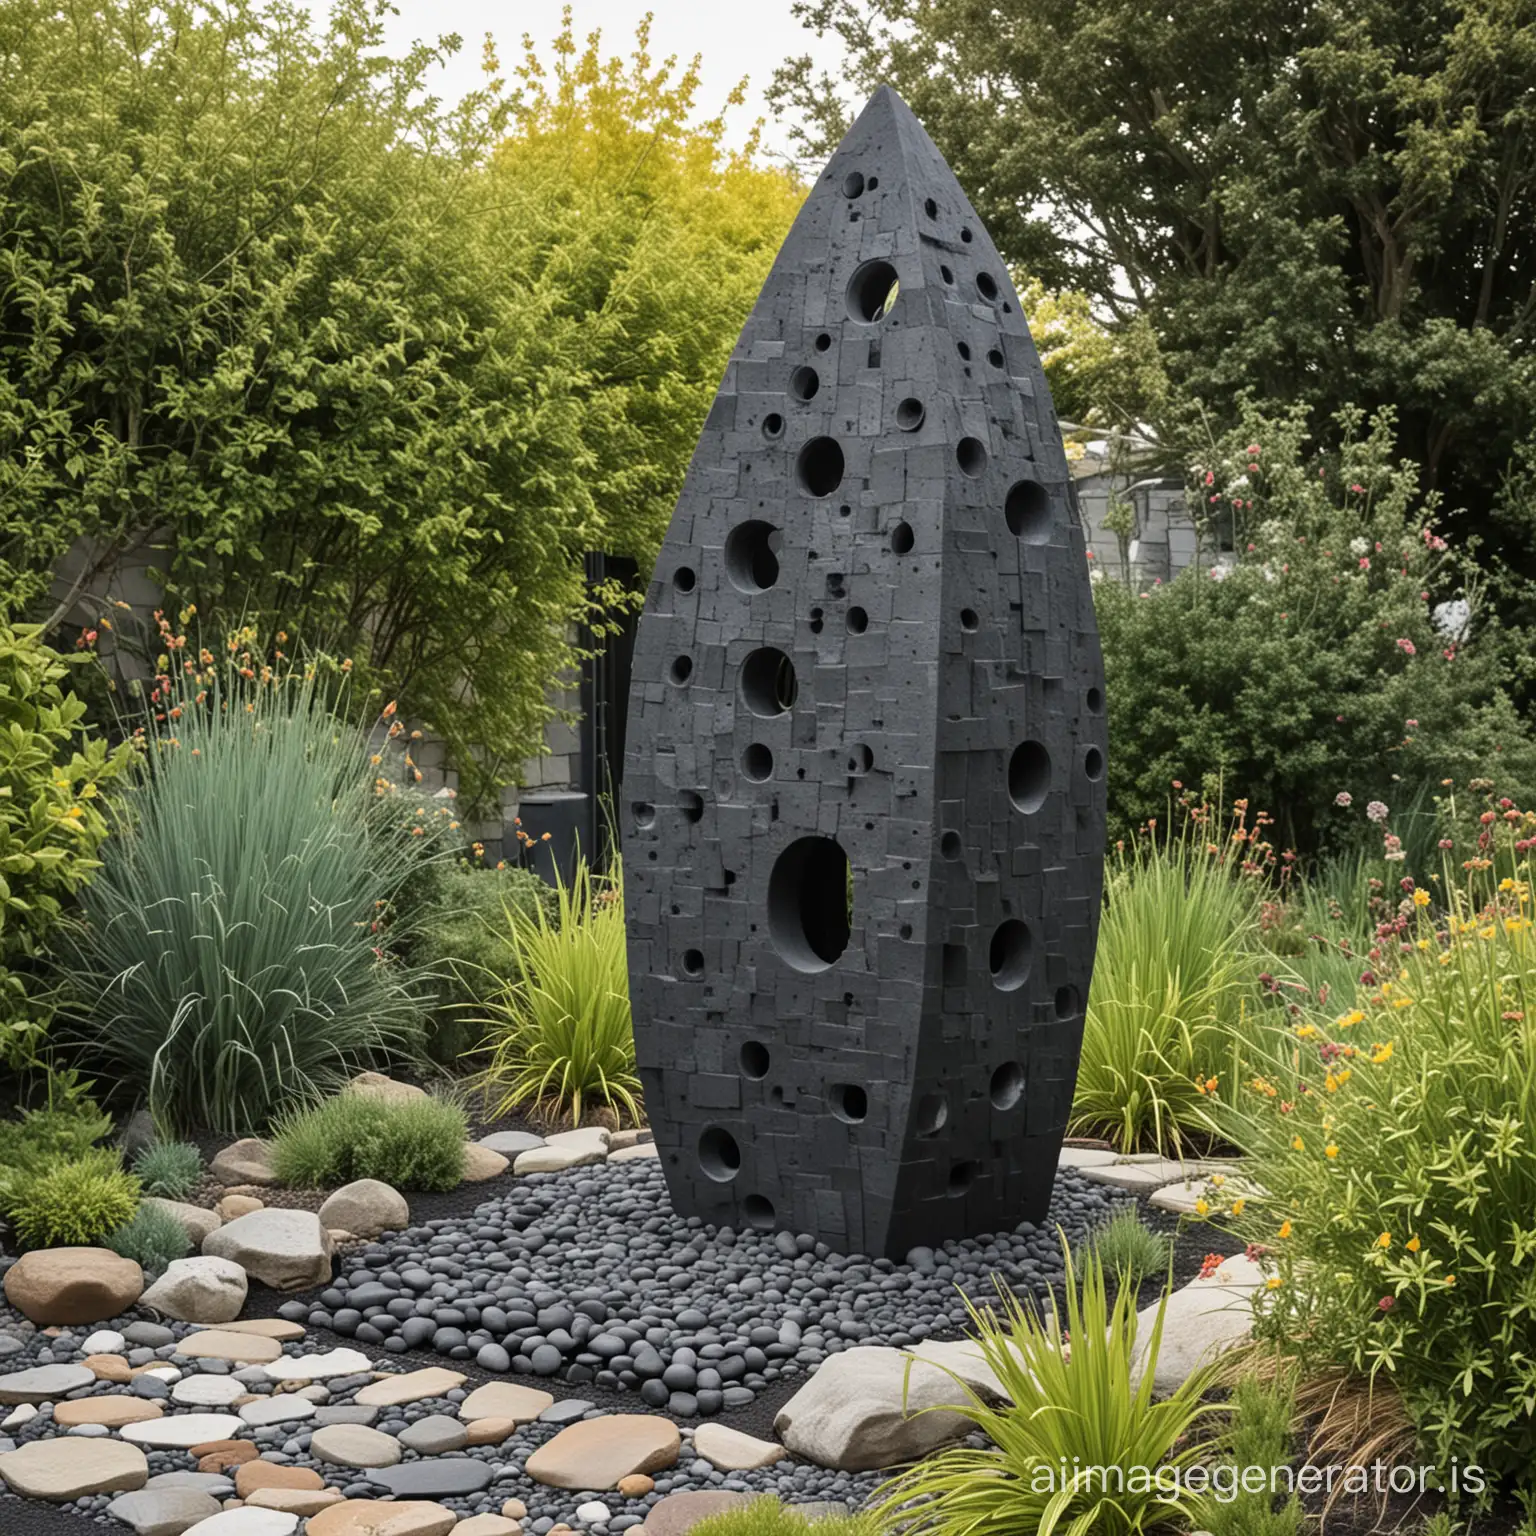 Create a modernist unique and appealing garden sculpture in front of a tiny basalt stone sea cottage